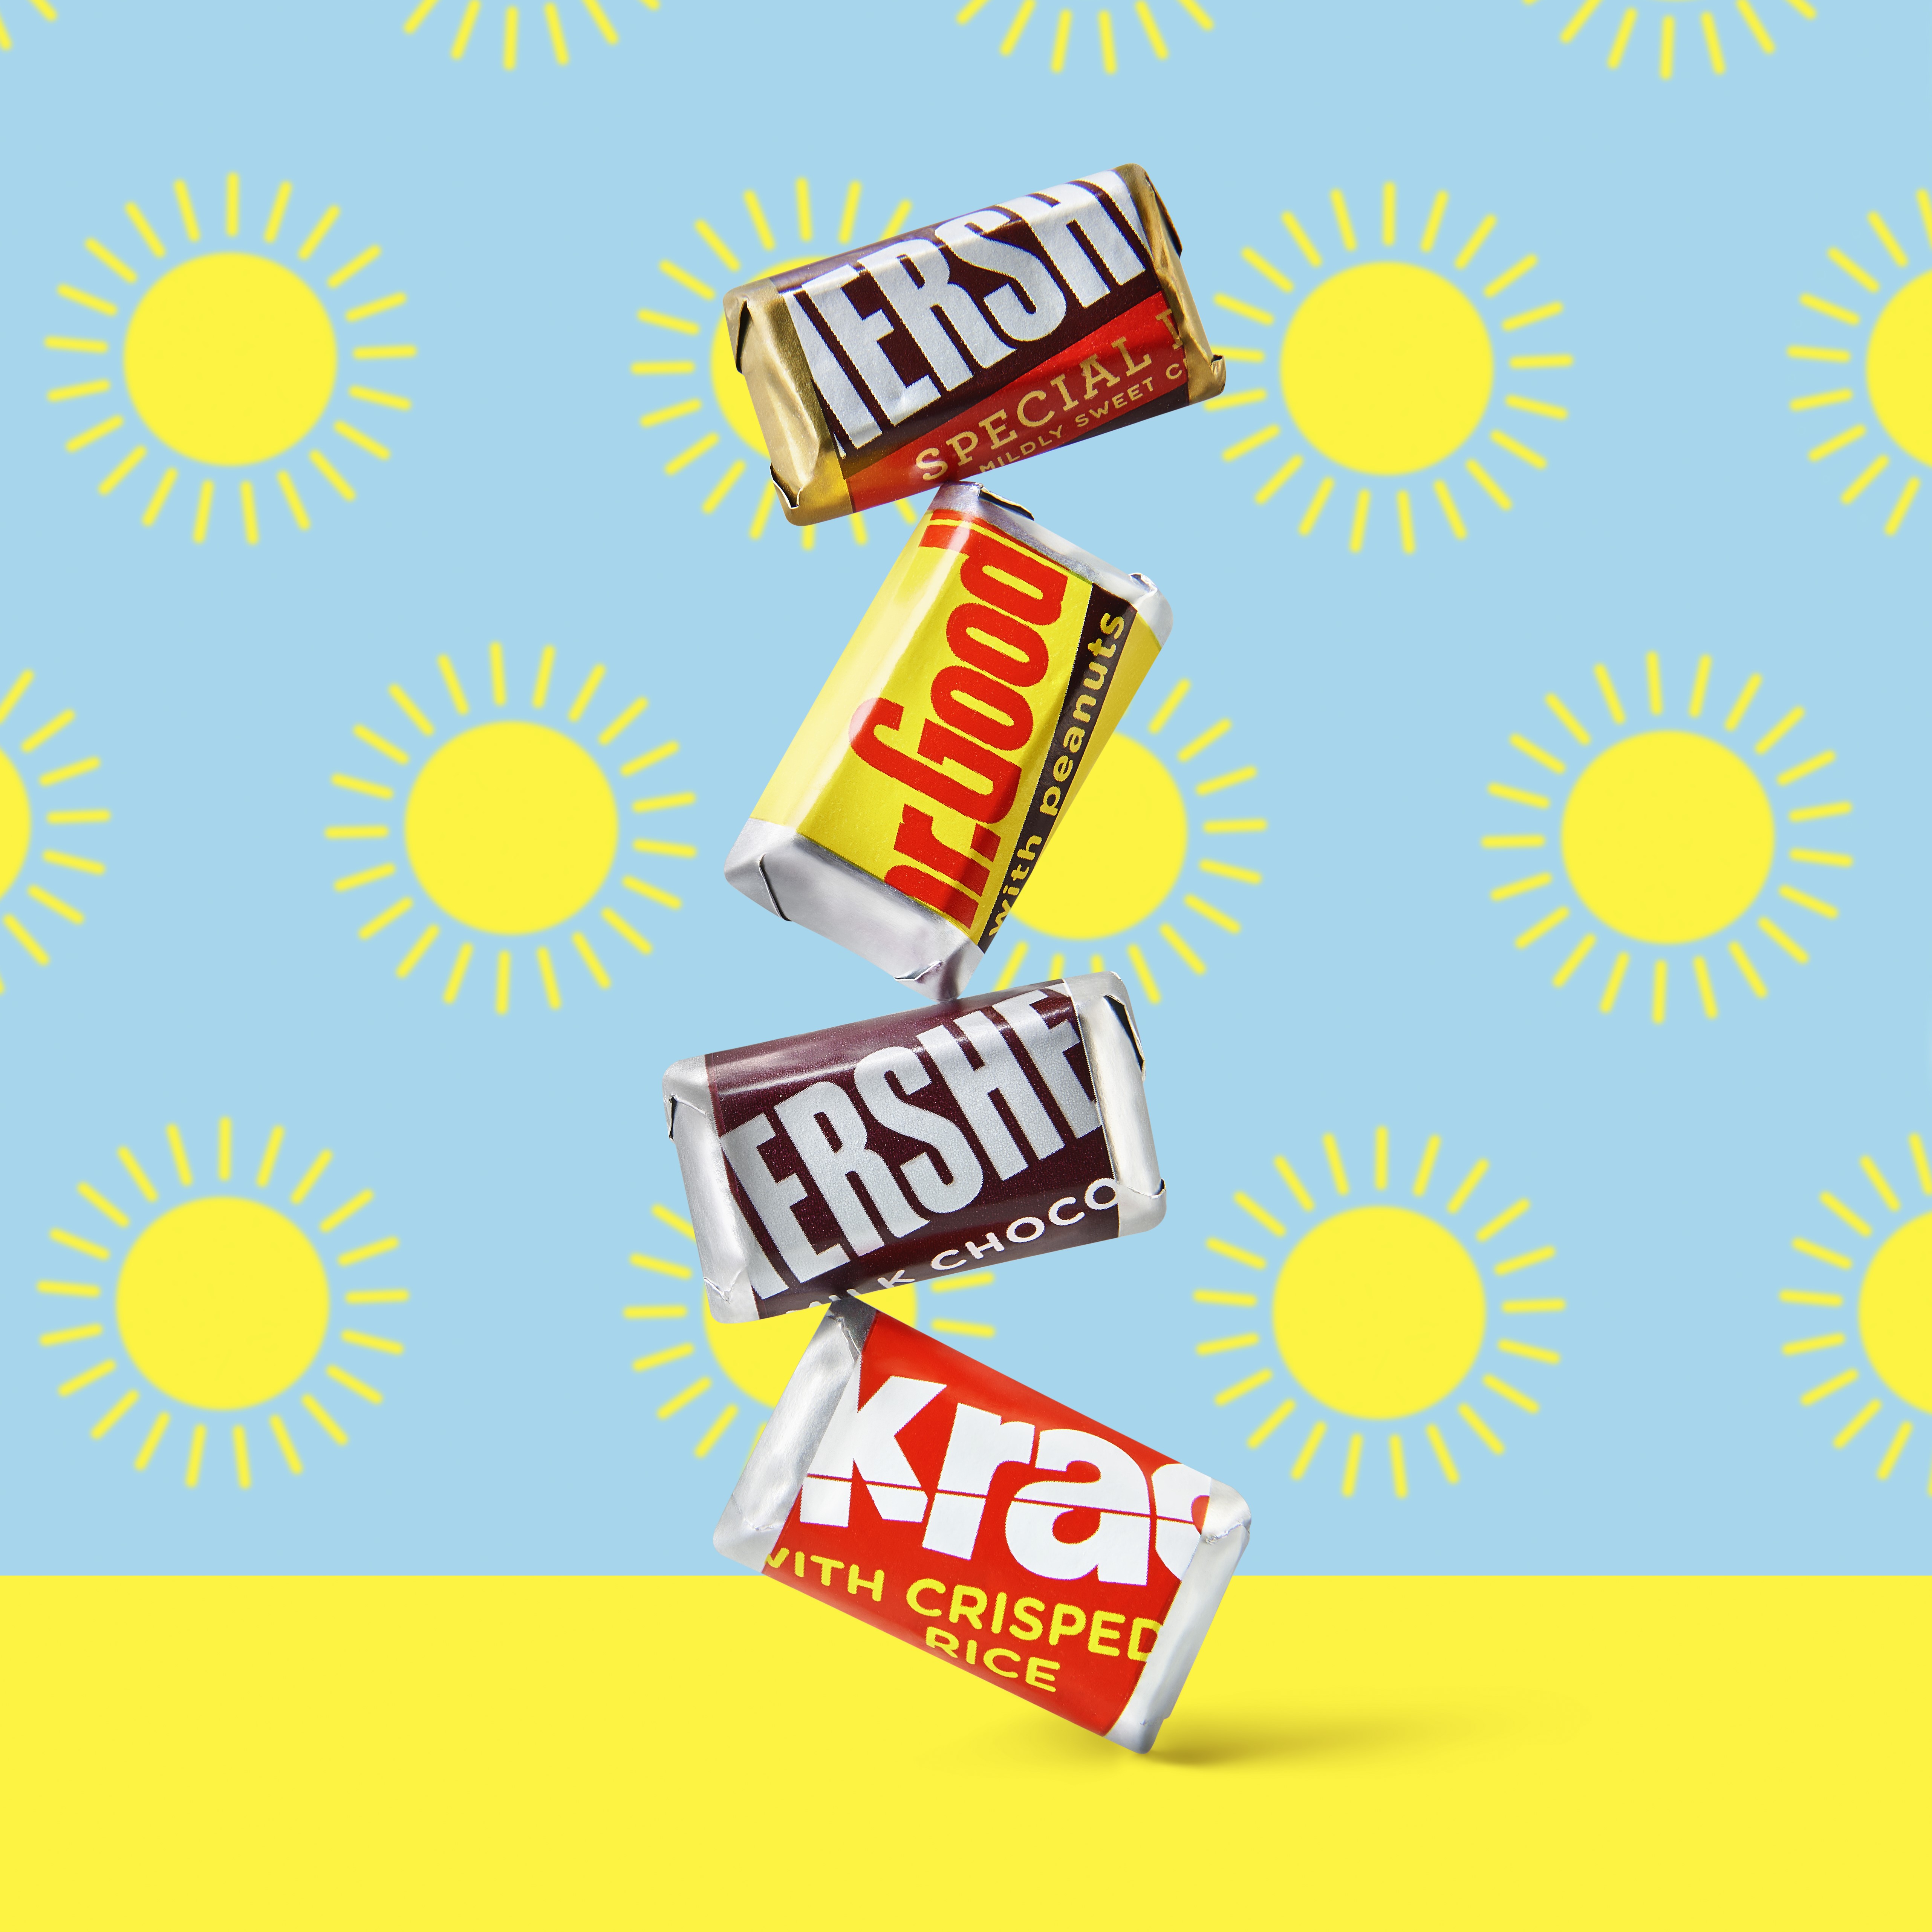 Assorted HERSHEY'S candies on Blue and Yellow Background with a sun pattern